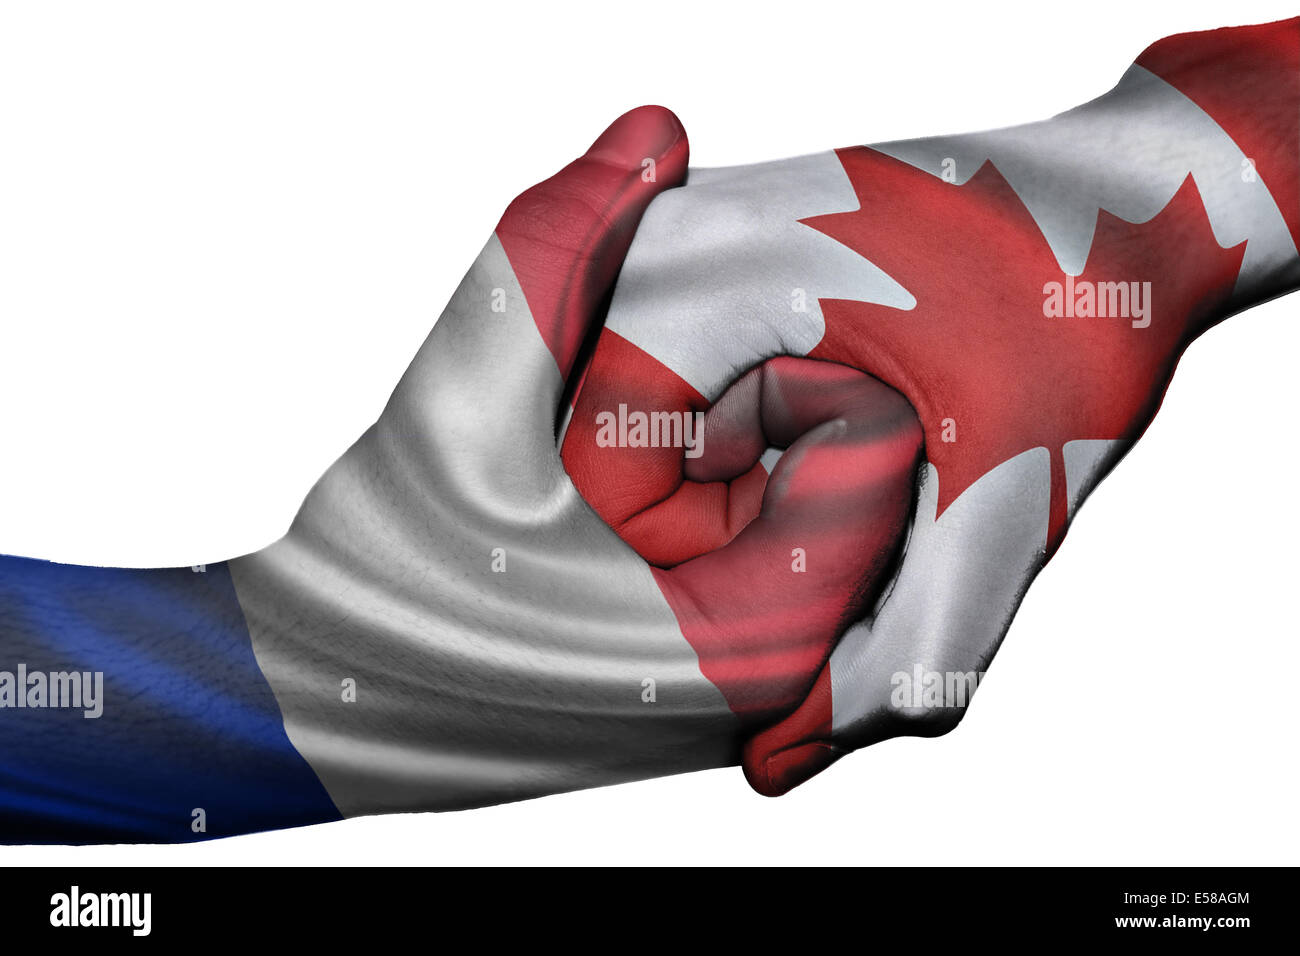 Diplomatic handshake between countries: flags of France and Canada overprinted the two hands Stock Photo